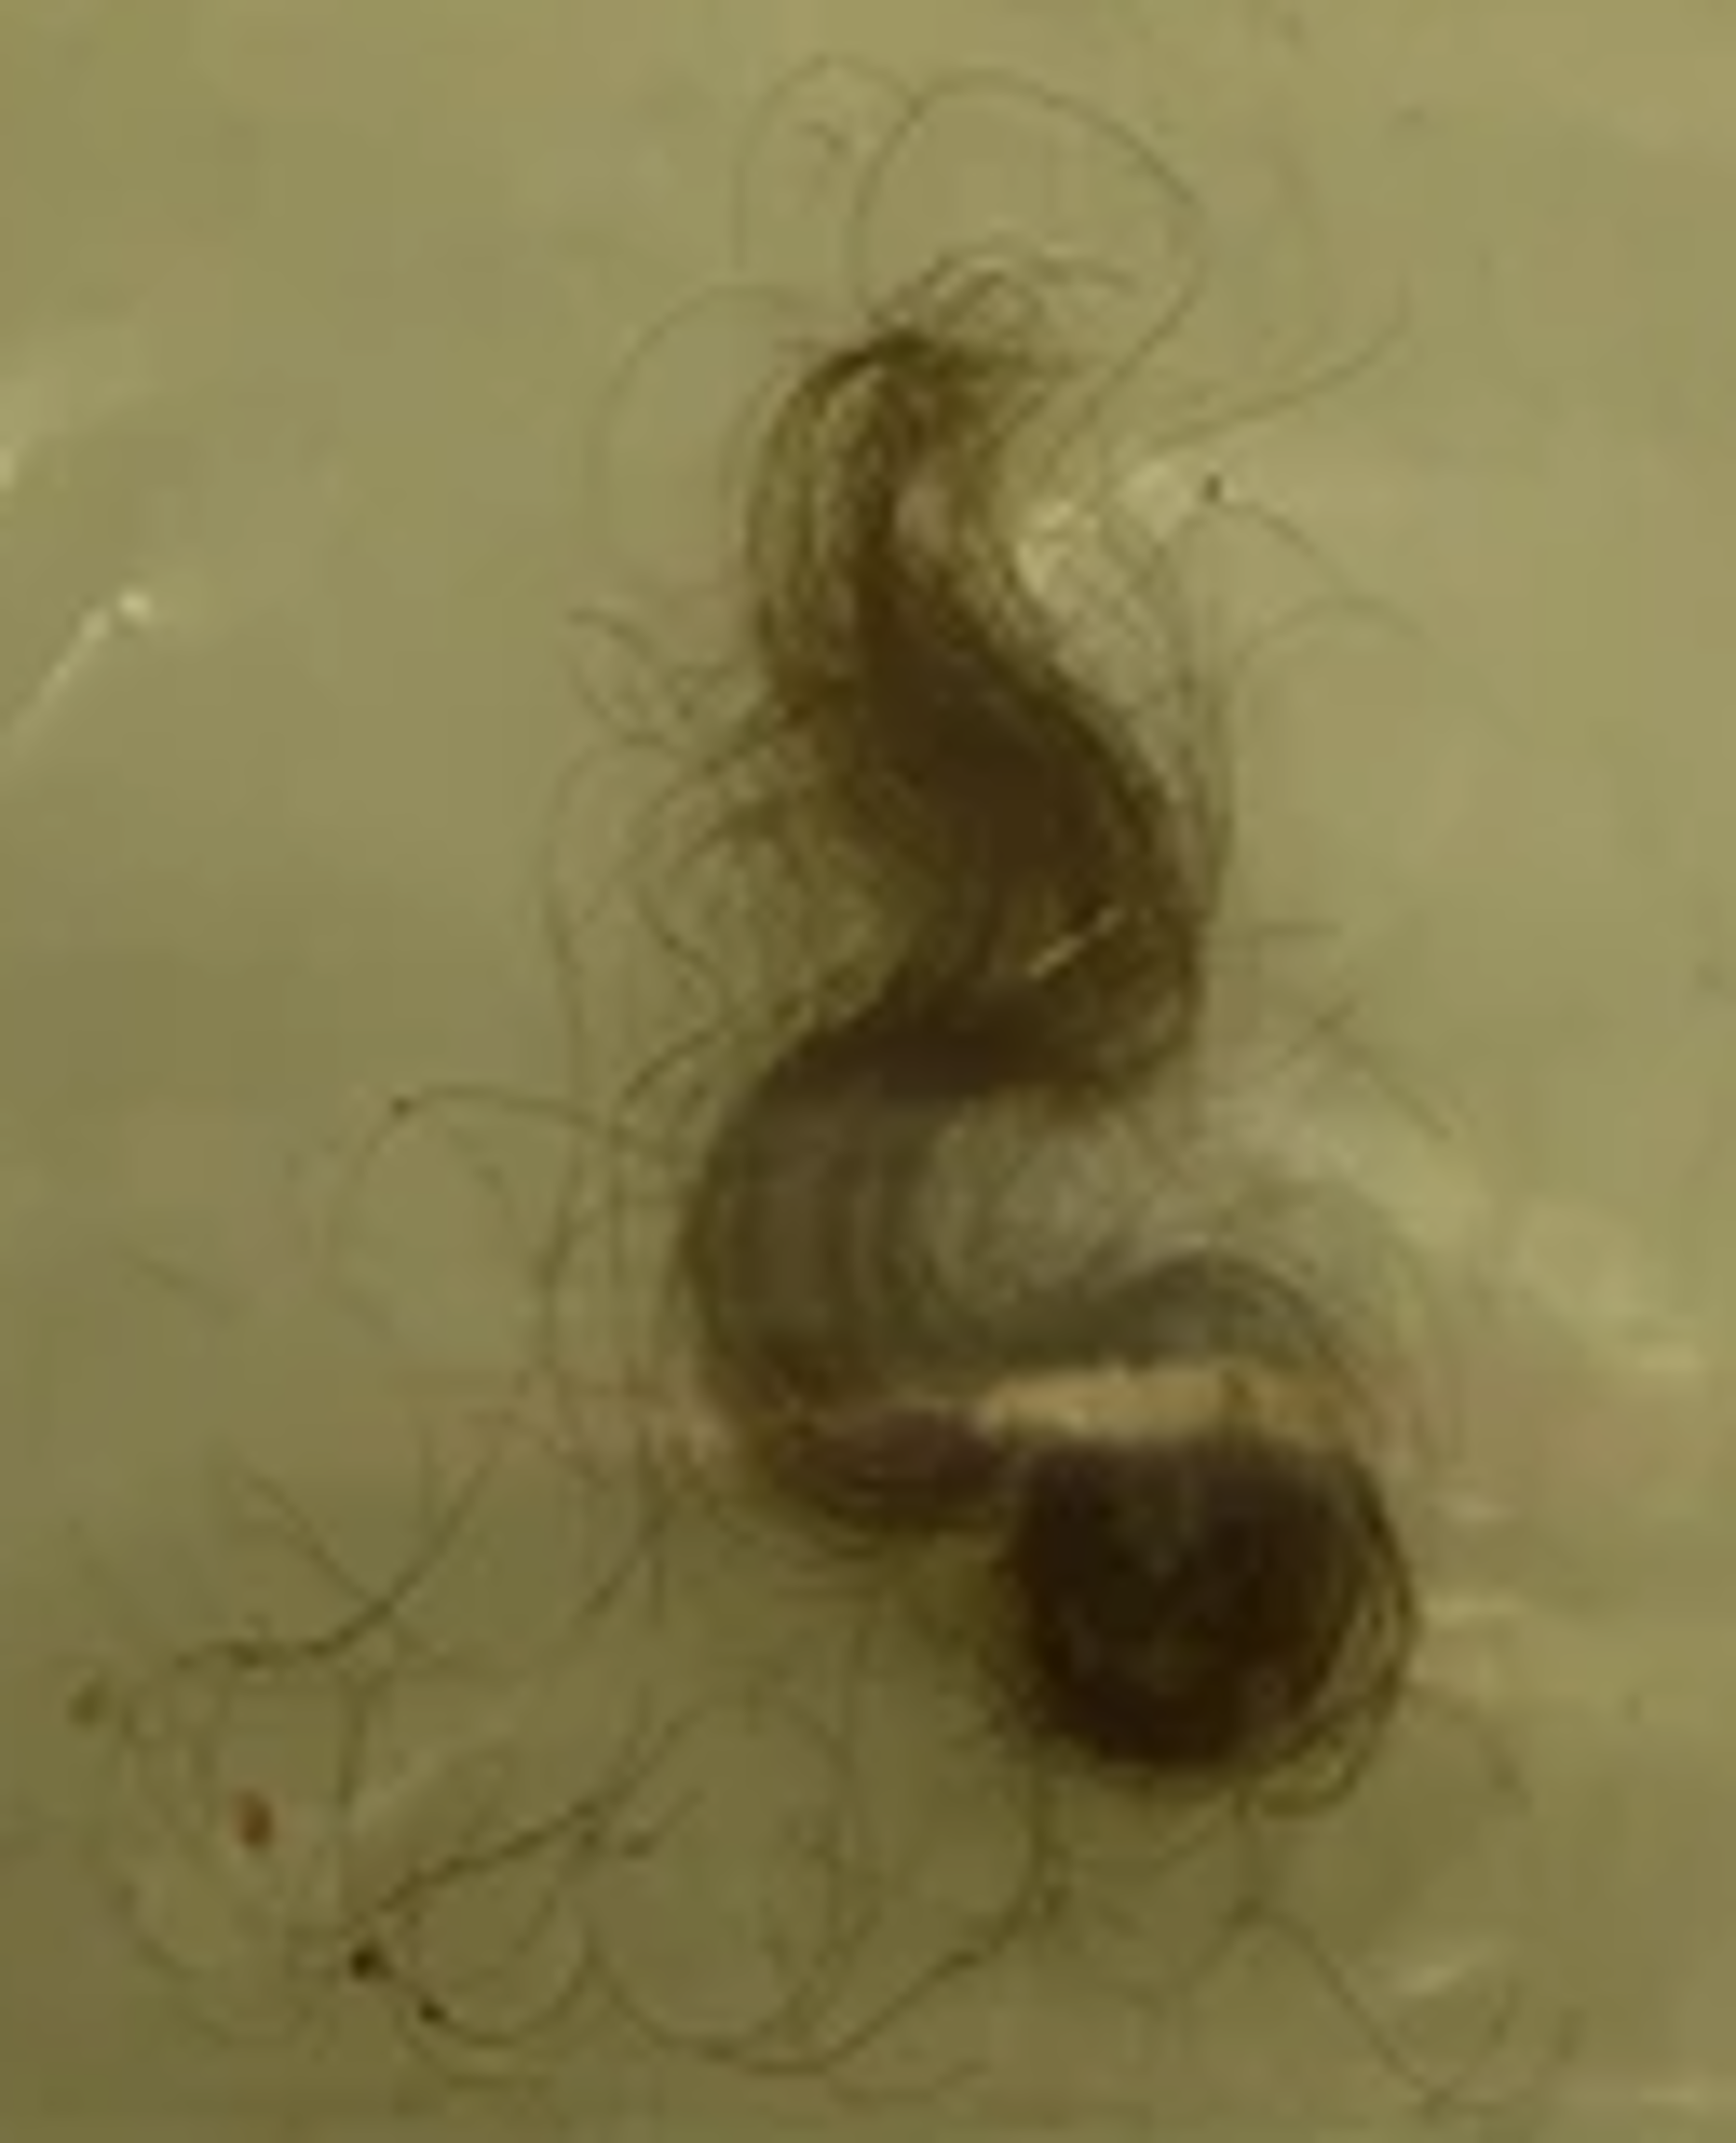 A soft-textured, wavy lock of hair belonging to a Kerma period individual excavated at Kadruka, Upper Nubia (northern Sudan). Ancient DNA analysis by Wang et al. (2022) has revealed that this specimen is genetically indistinguishable from the Cushites of the Early Pastoral Neolithic. (For more details, see Did the ancient Cushites have soft-textured hair?.)